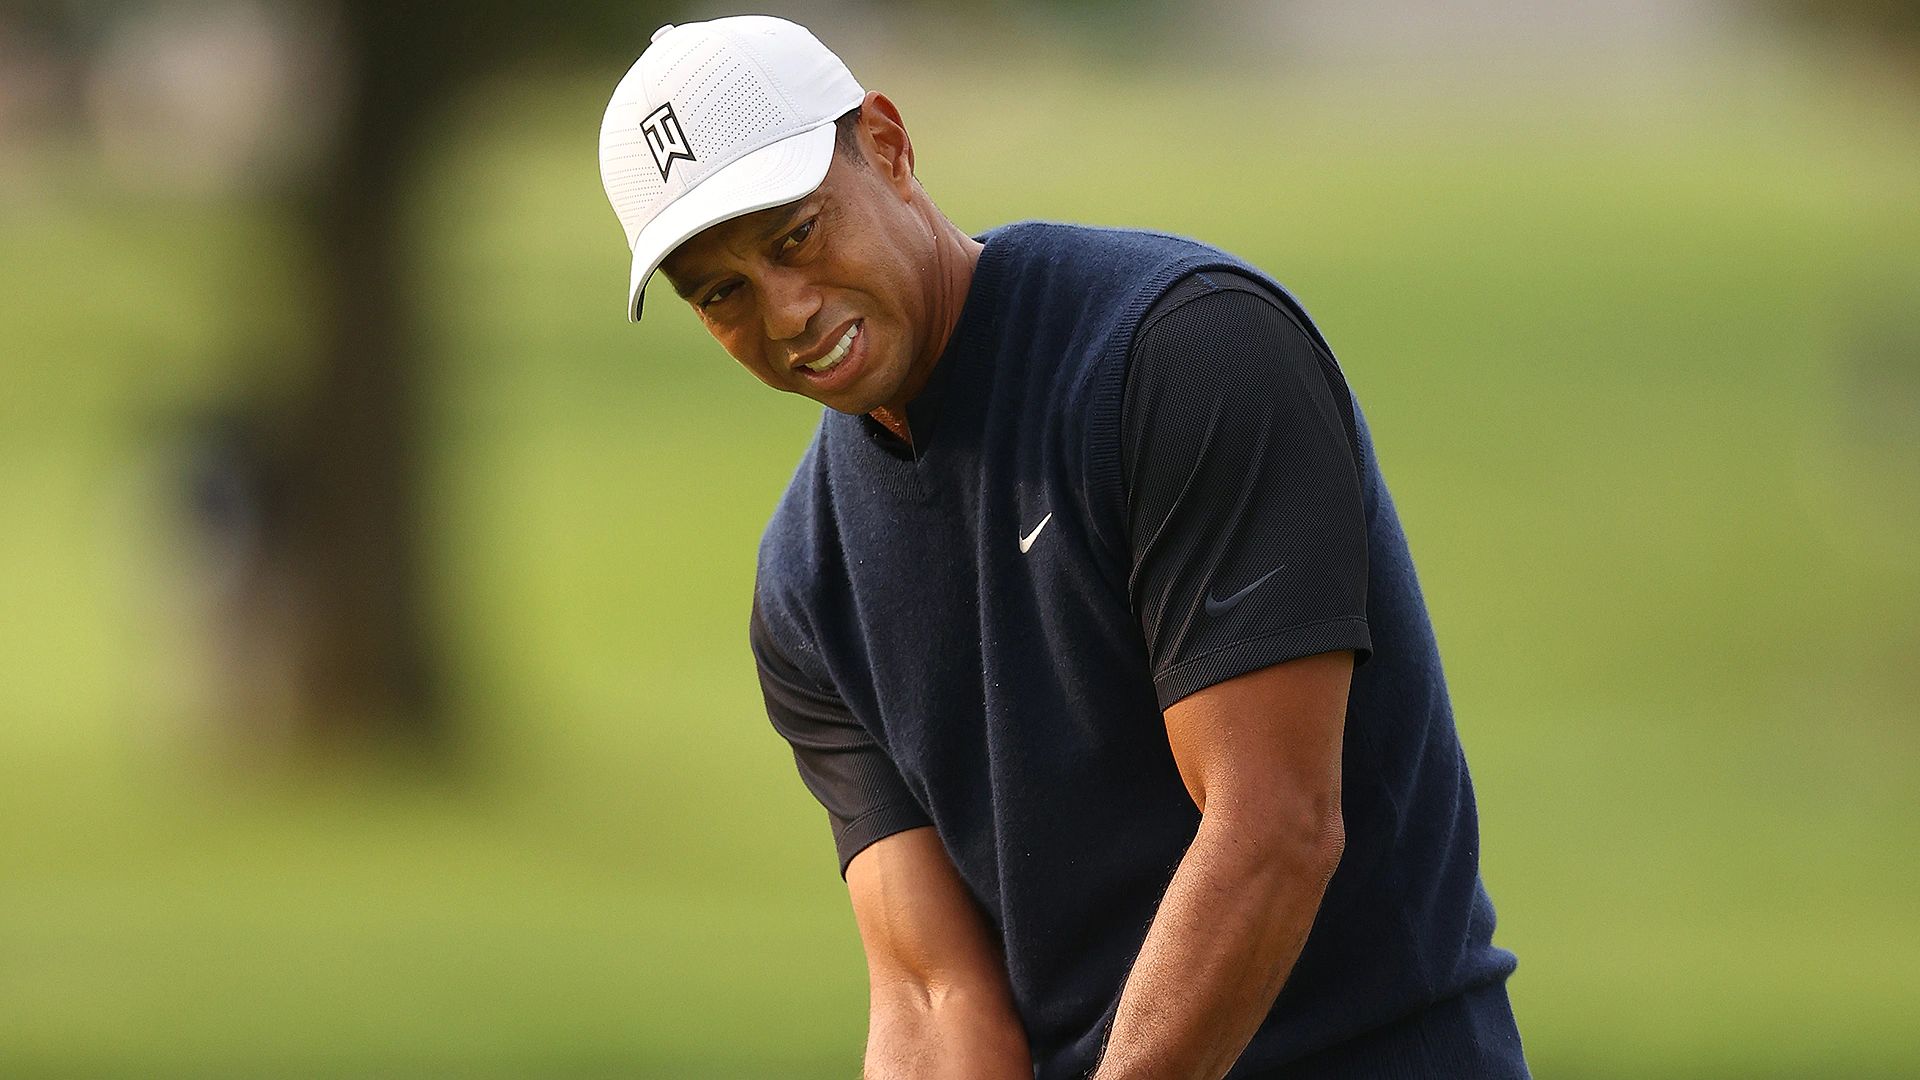 U.S. Open 2020 highlights: Tiger Woods, Round 1 at Winged Foot